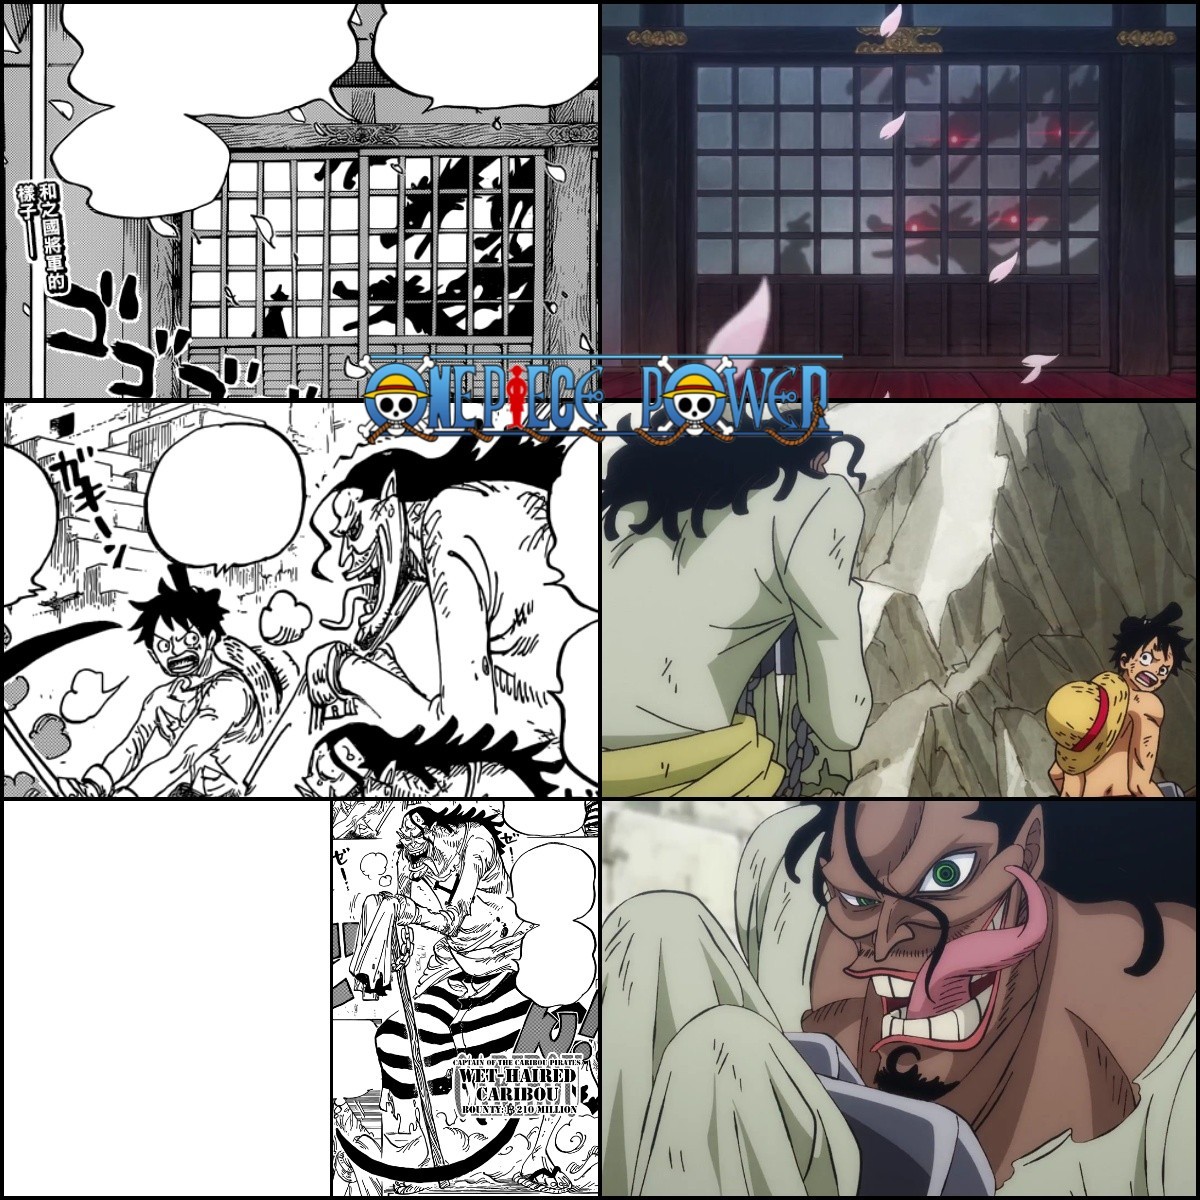 Episode 921 Vs Chapters 927-928